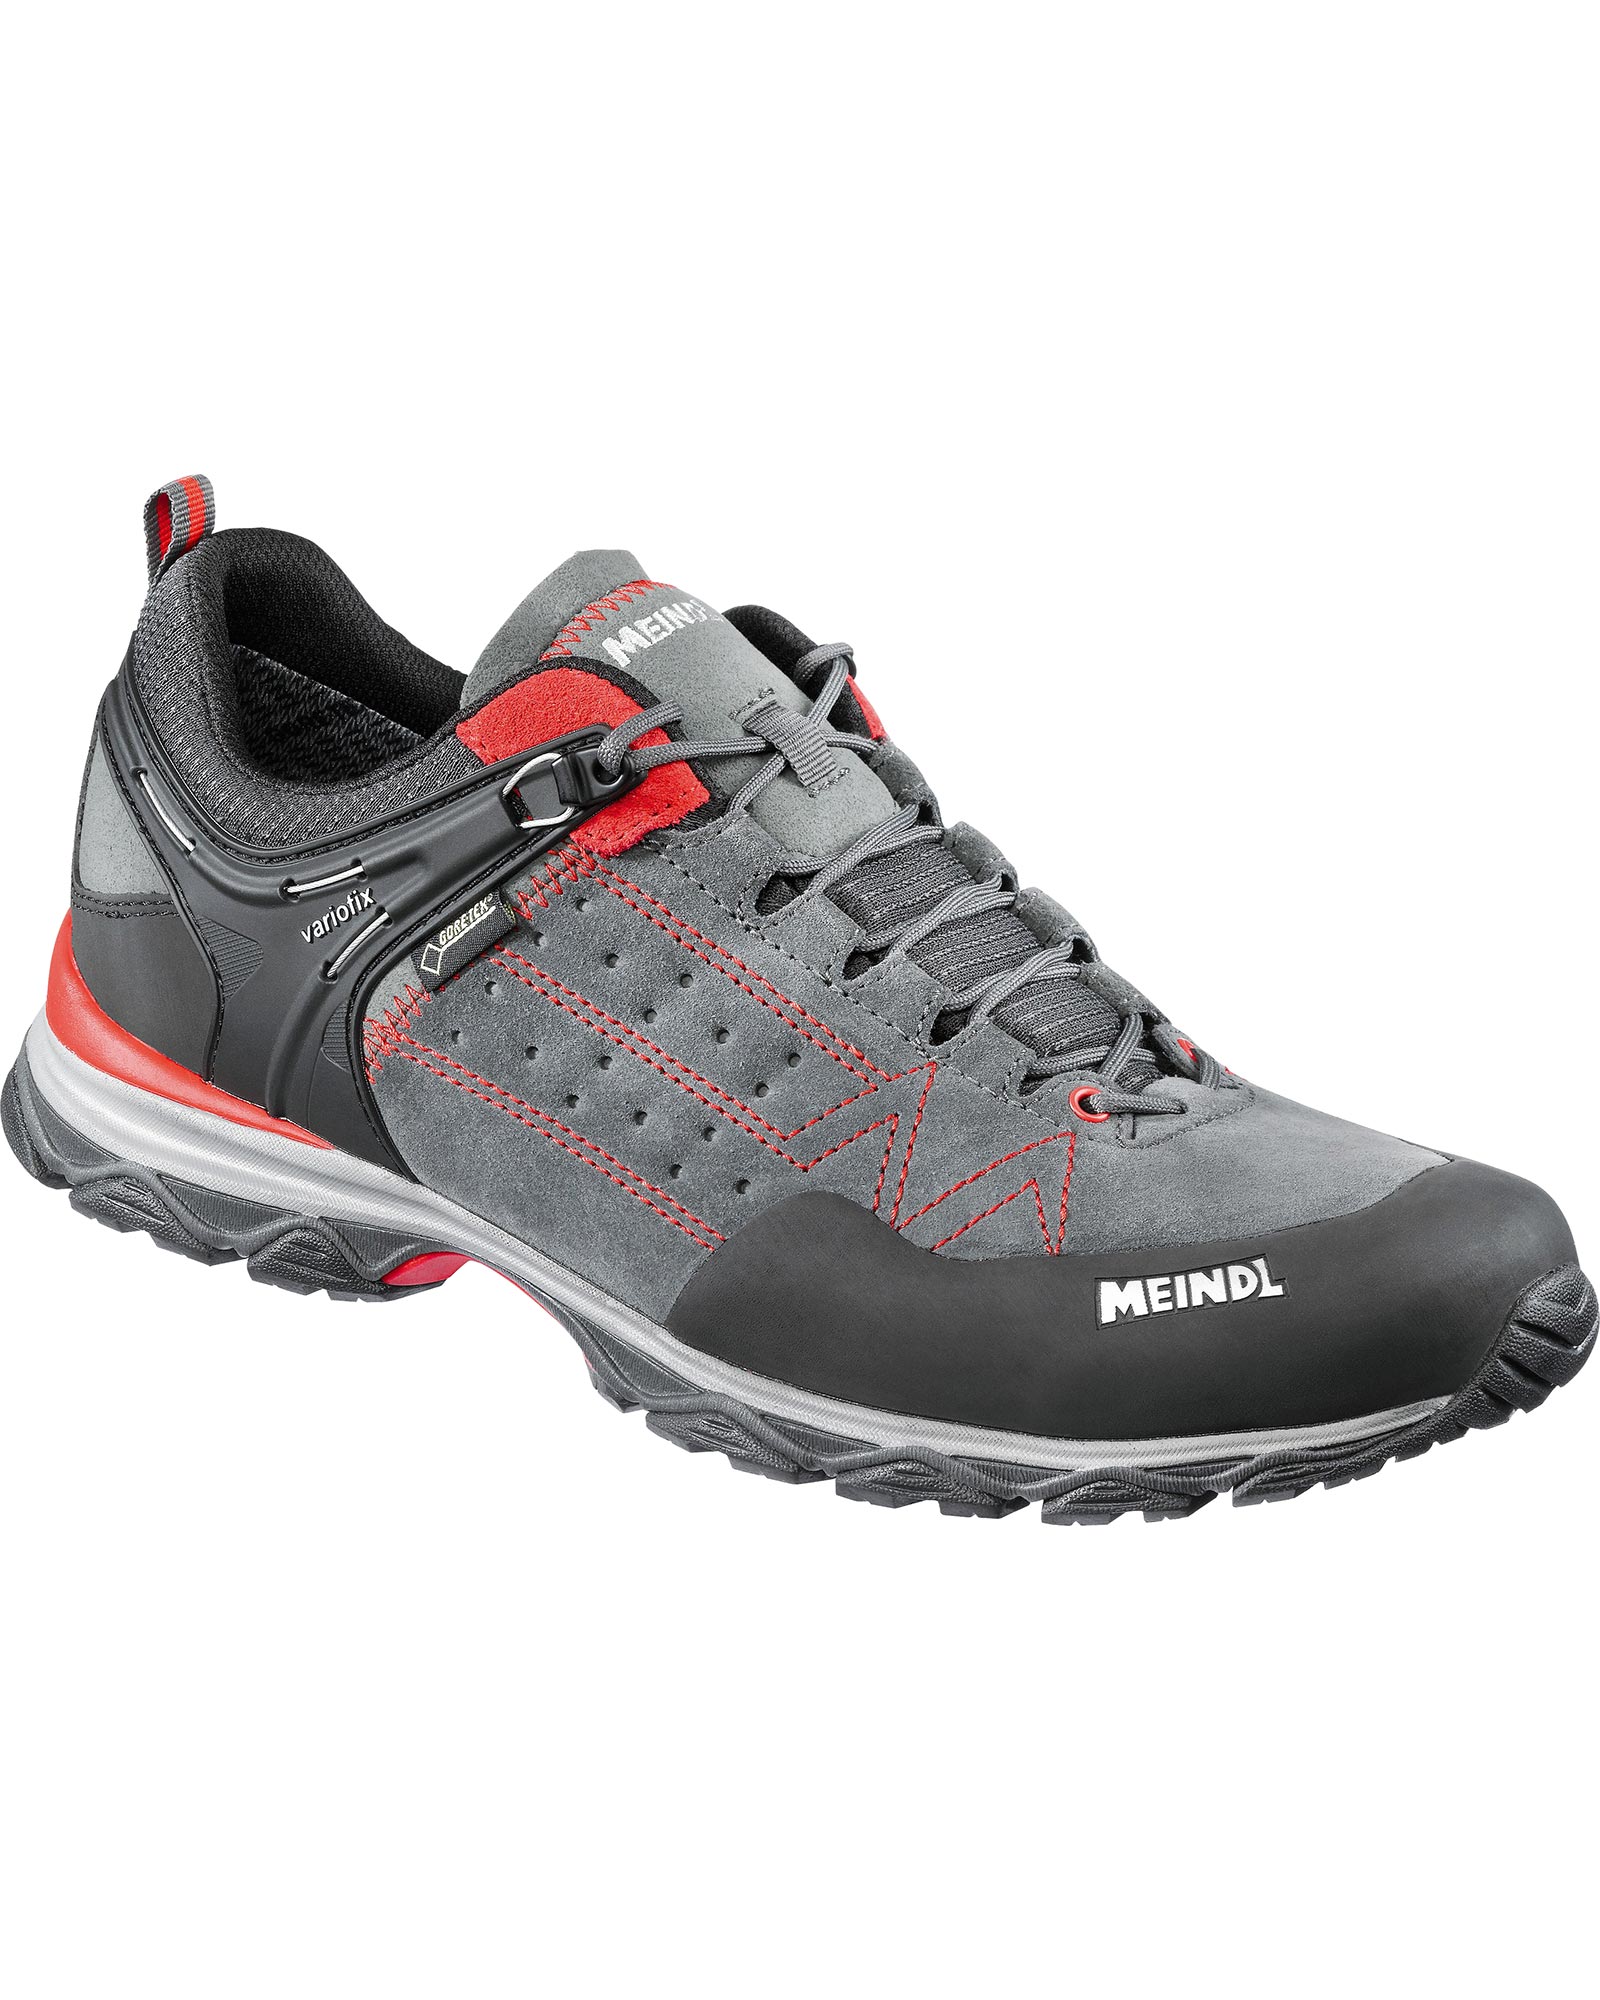 Meindl Ontario GORE TEX Men’s Shoes - Red/Anthracite UK 7.5